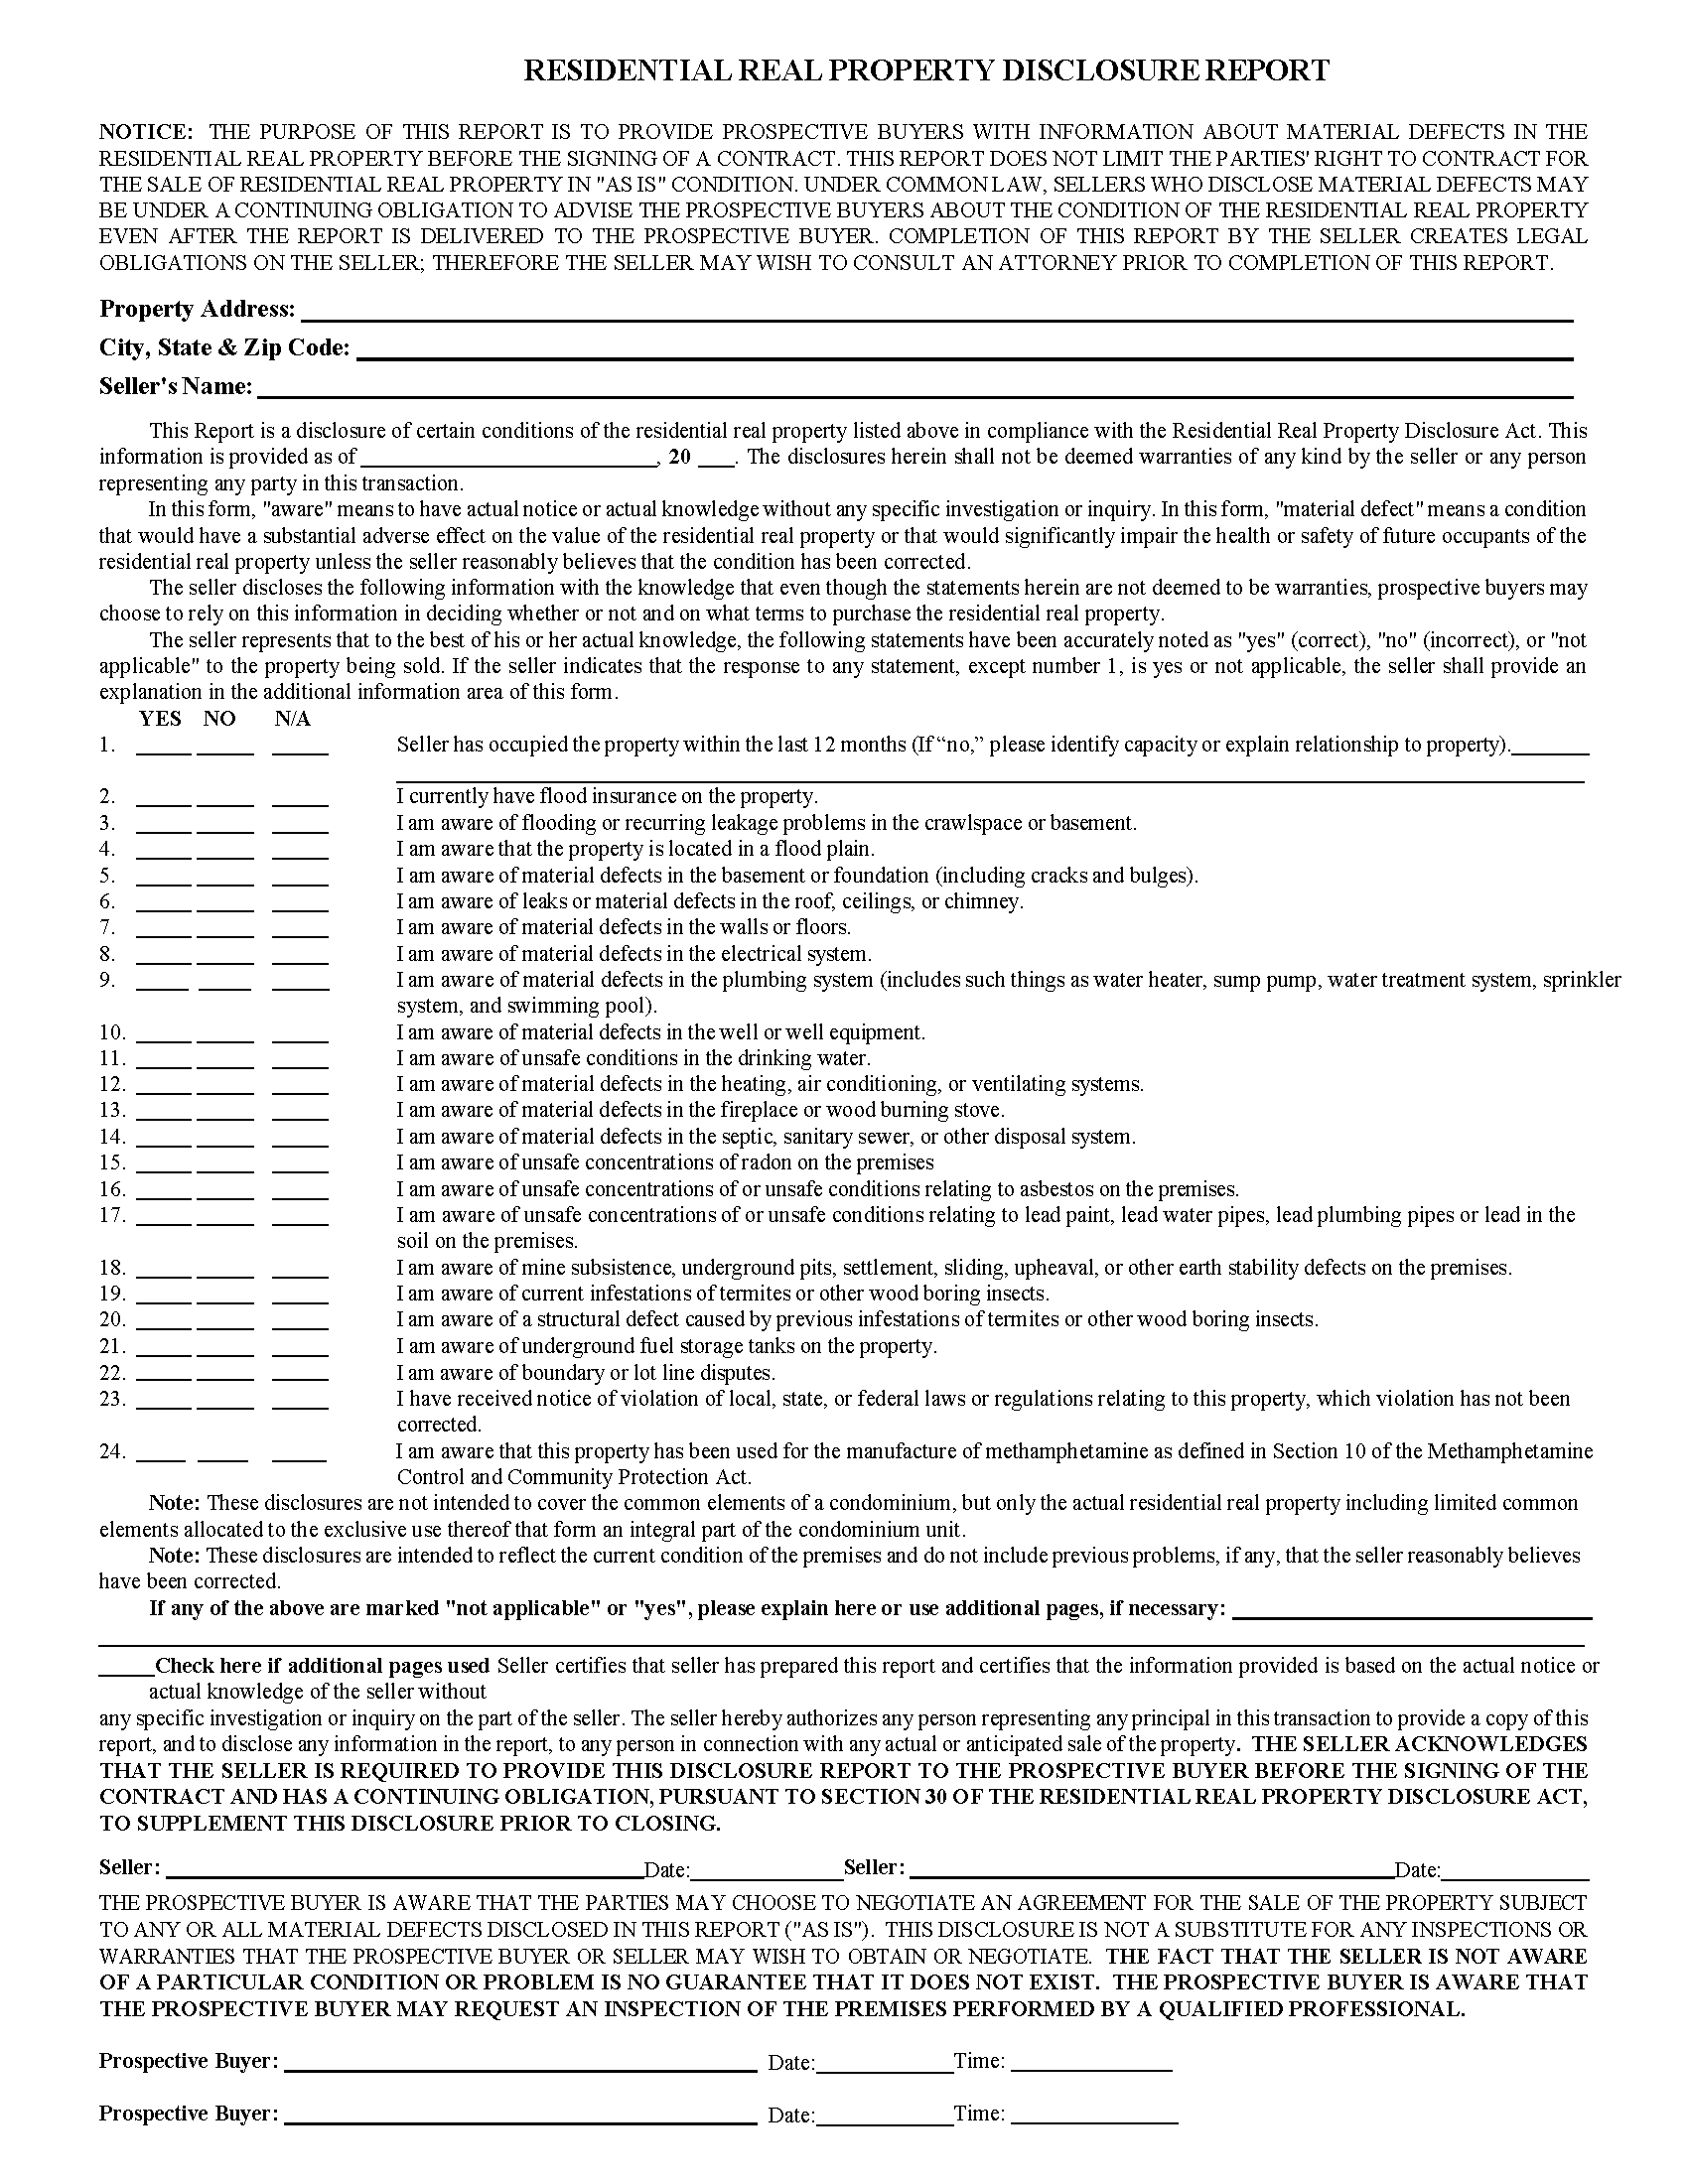 Greene County Real Property Disclosure Form